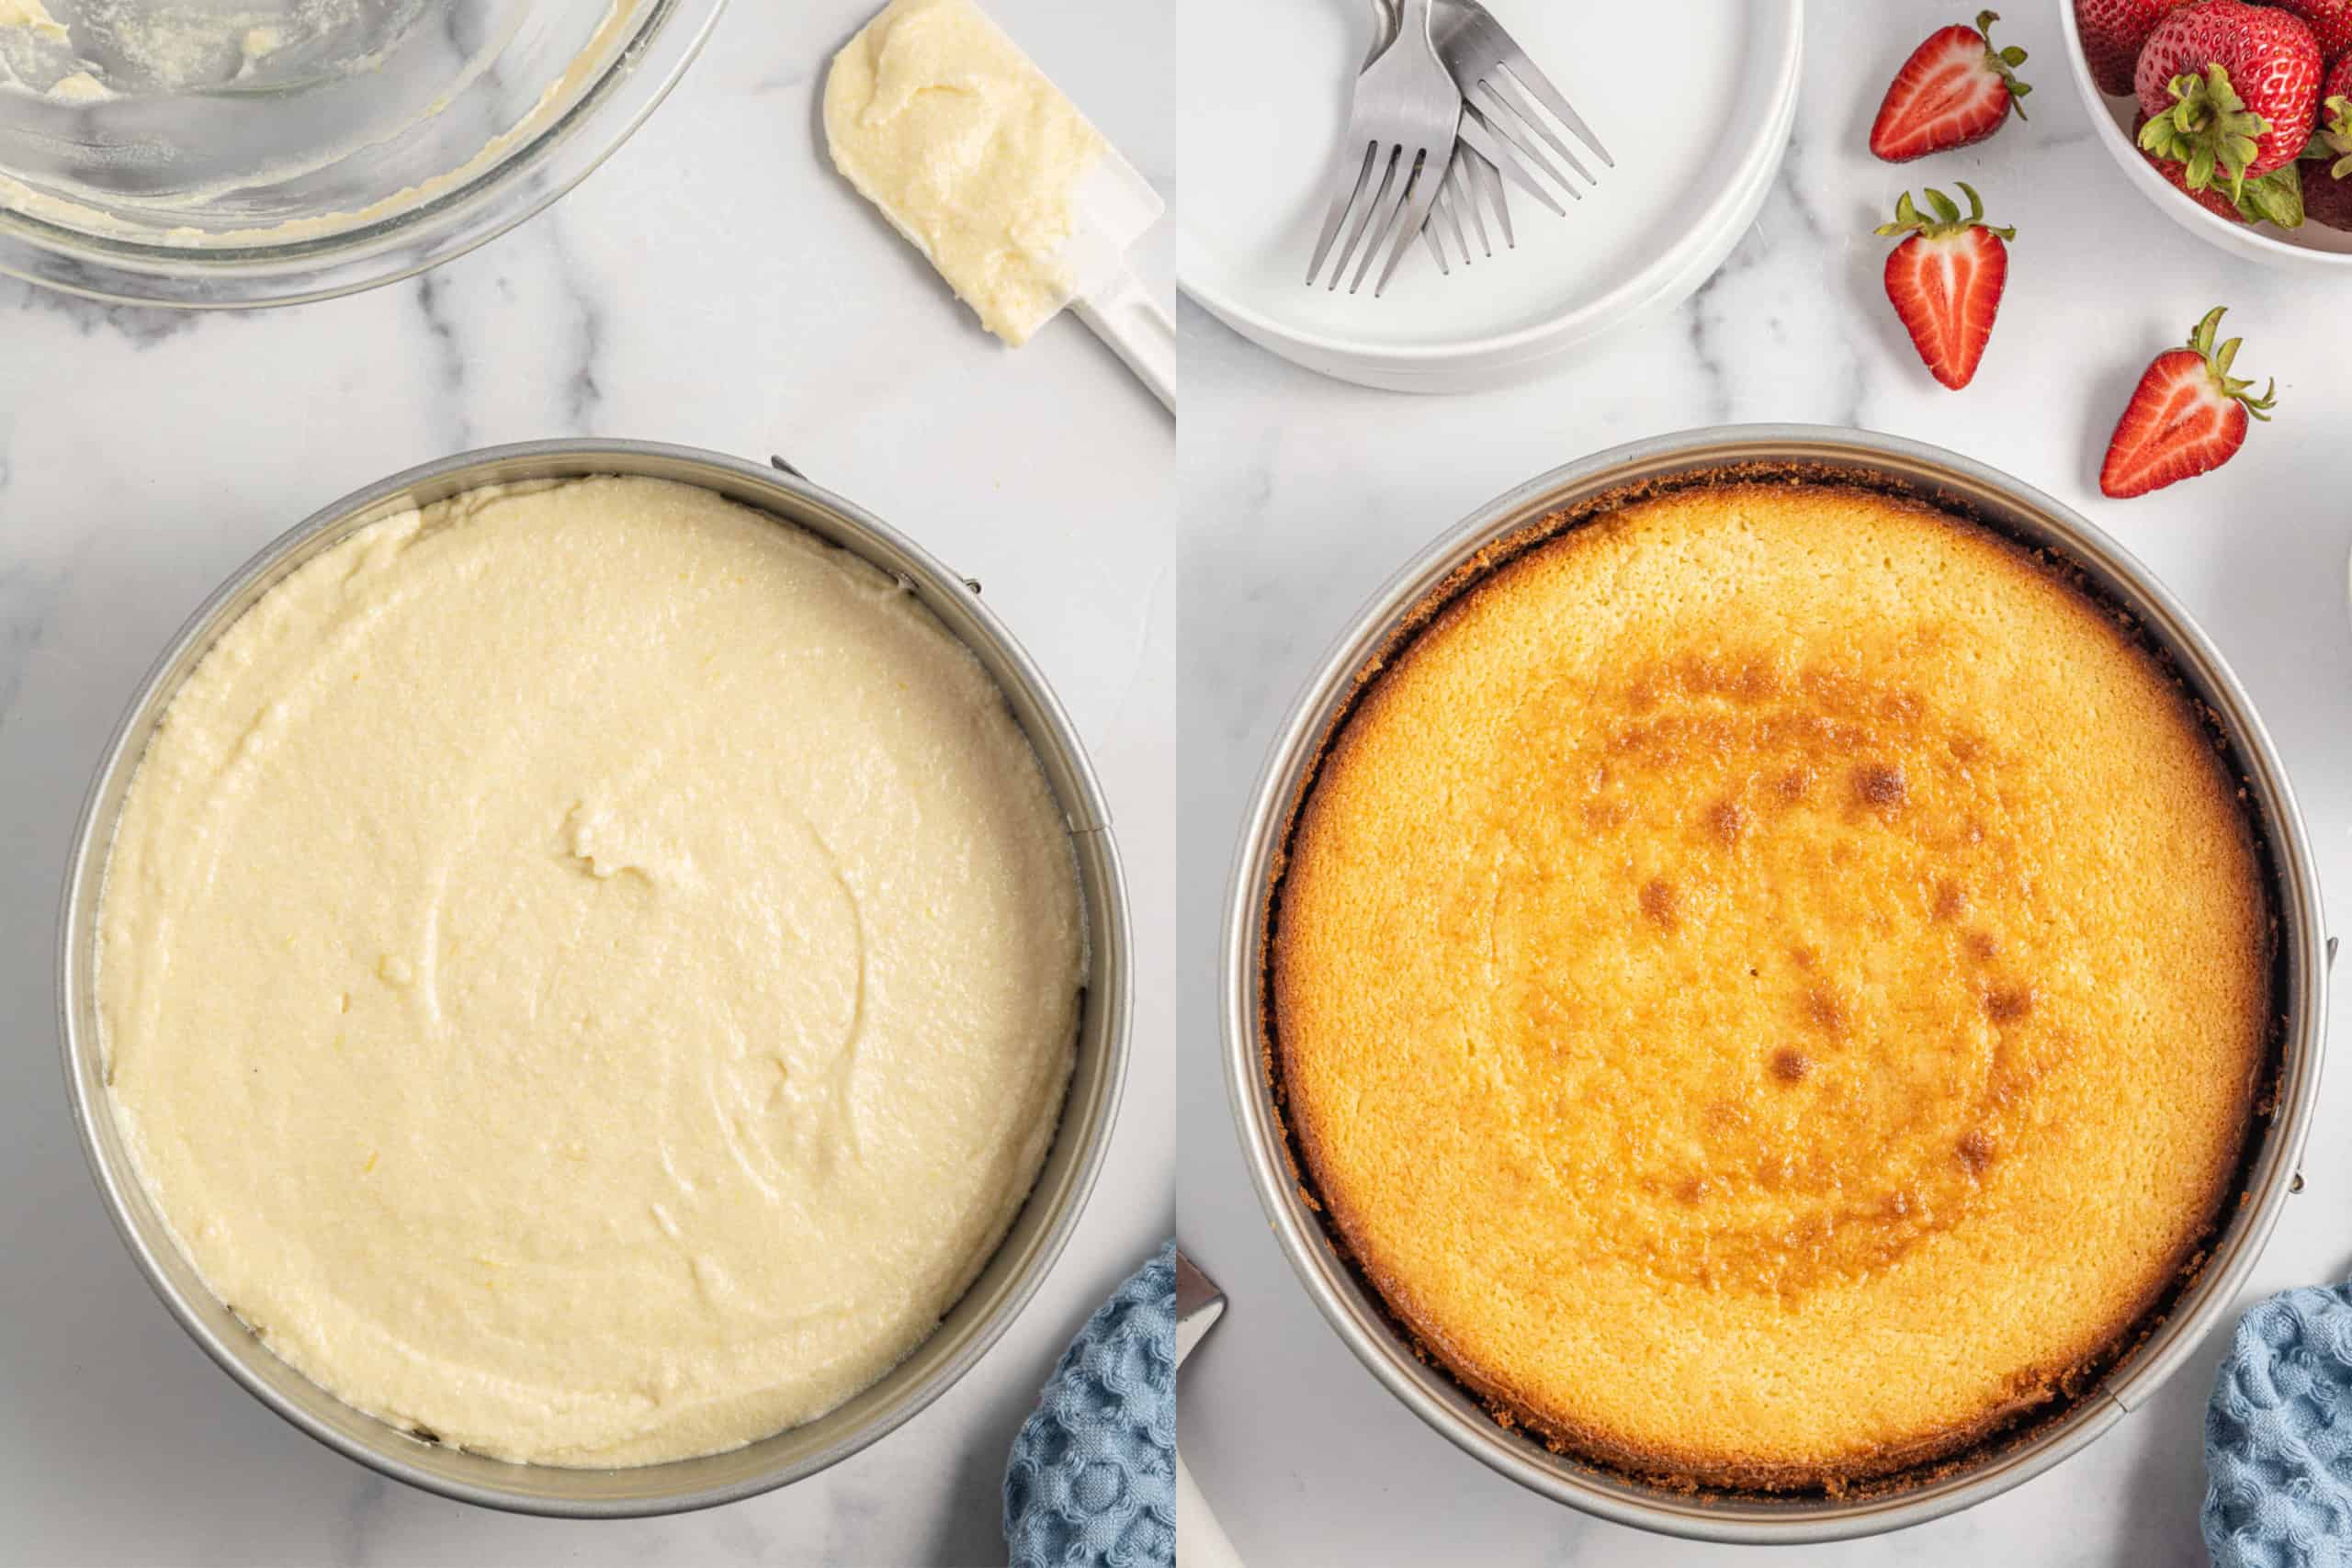 Step by step photos showing how to bake lemon ricotta cake.